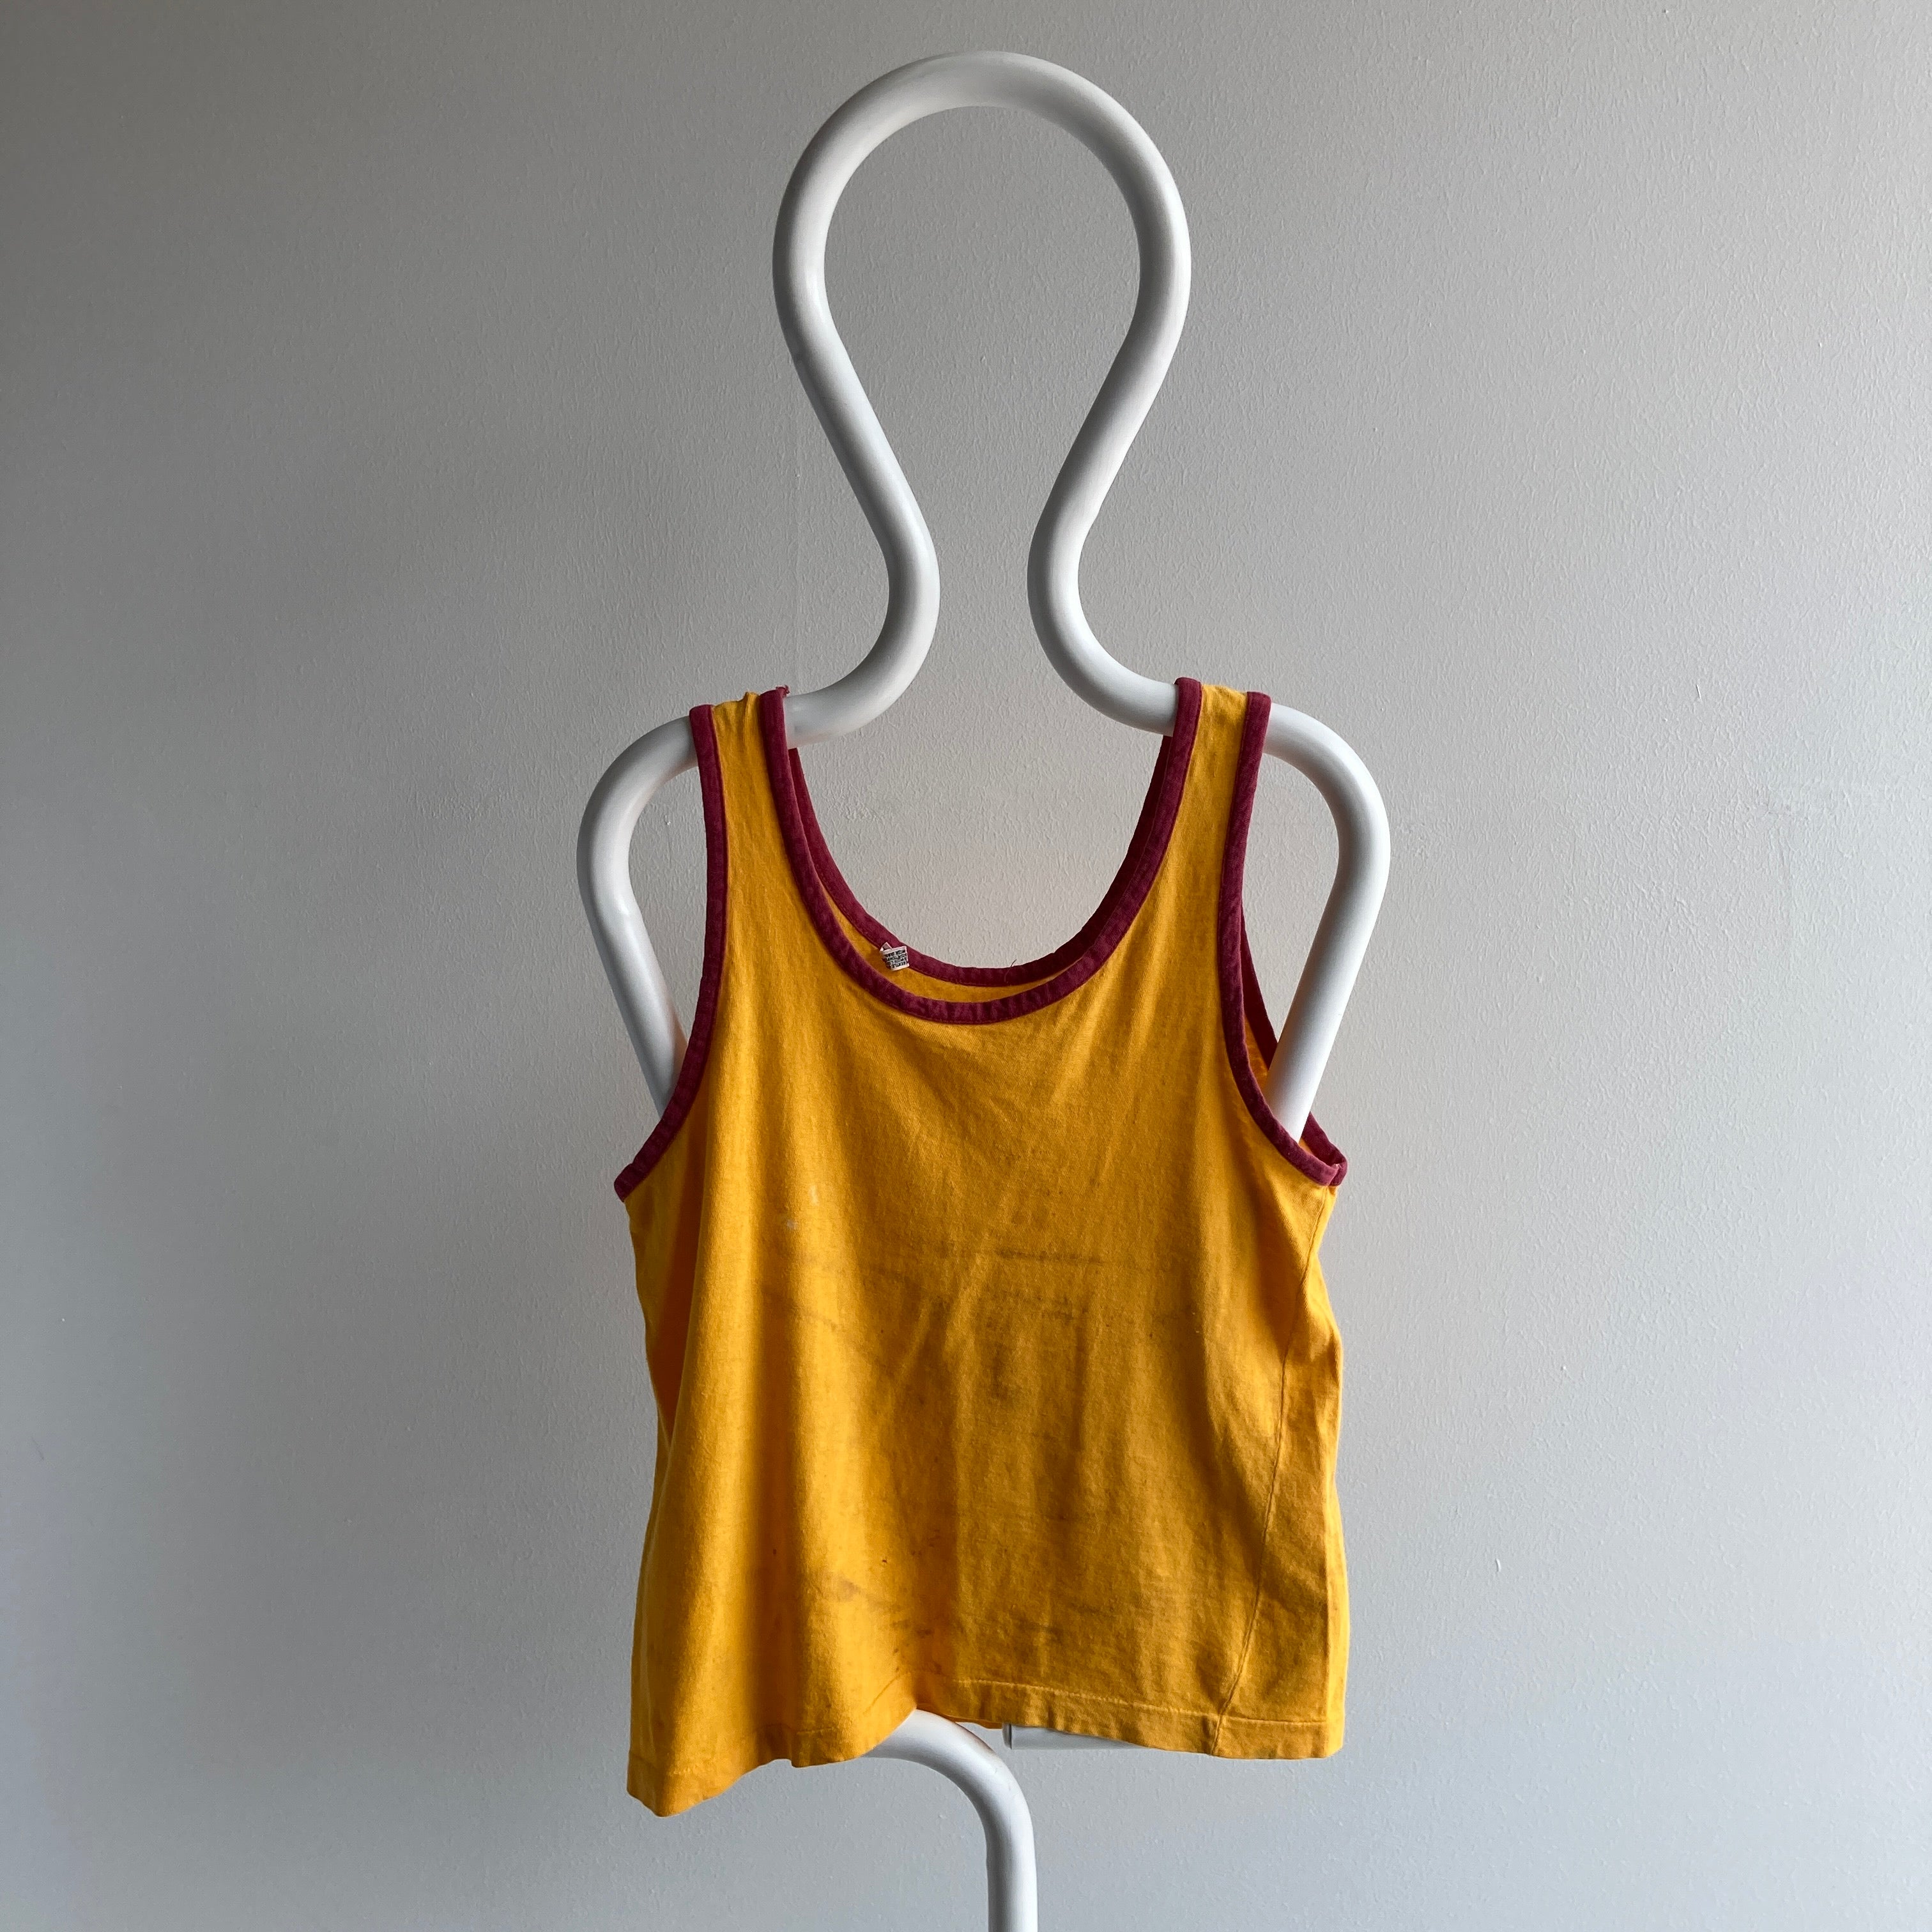 1970's Heavily Stained Marigold Yellow + Rust Piping - Super Soft + Worn Tank Top - Cotton